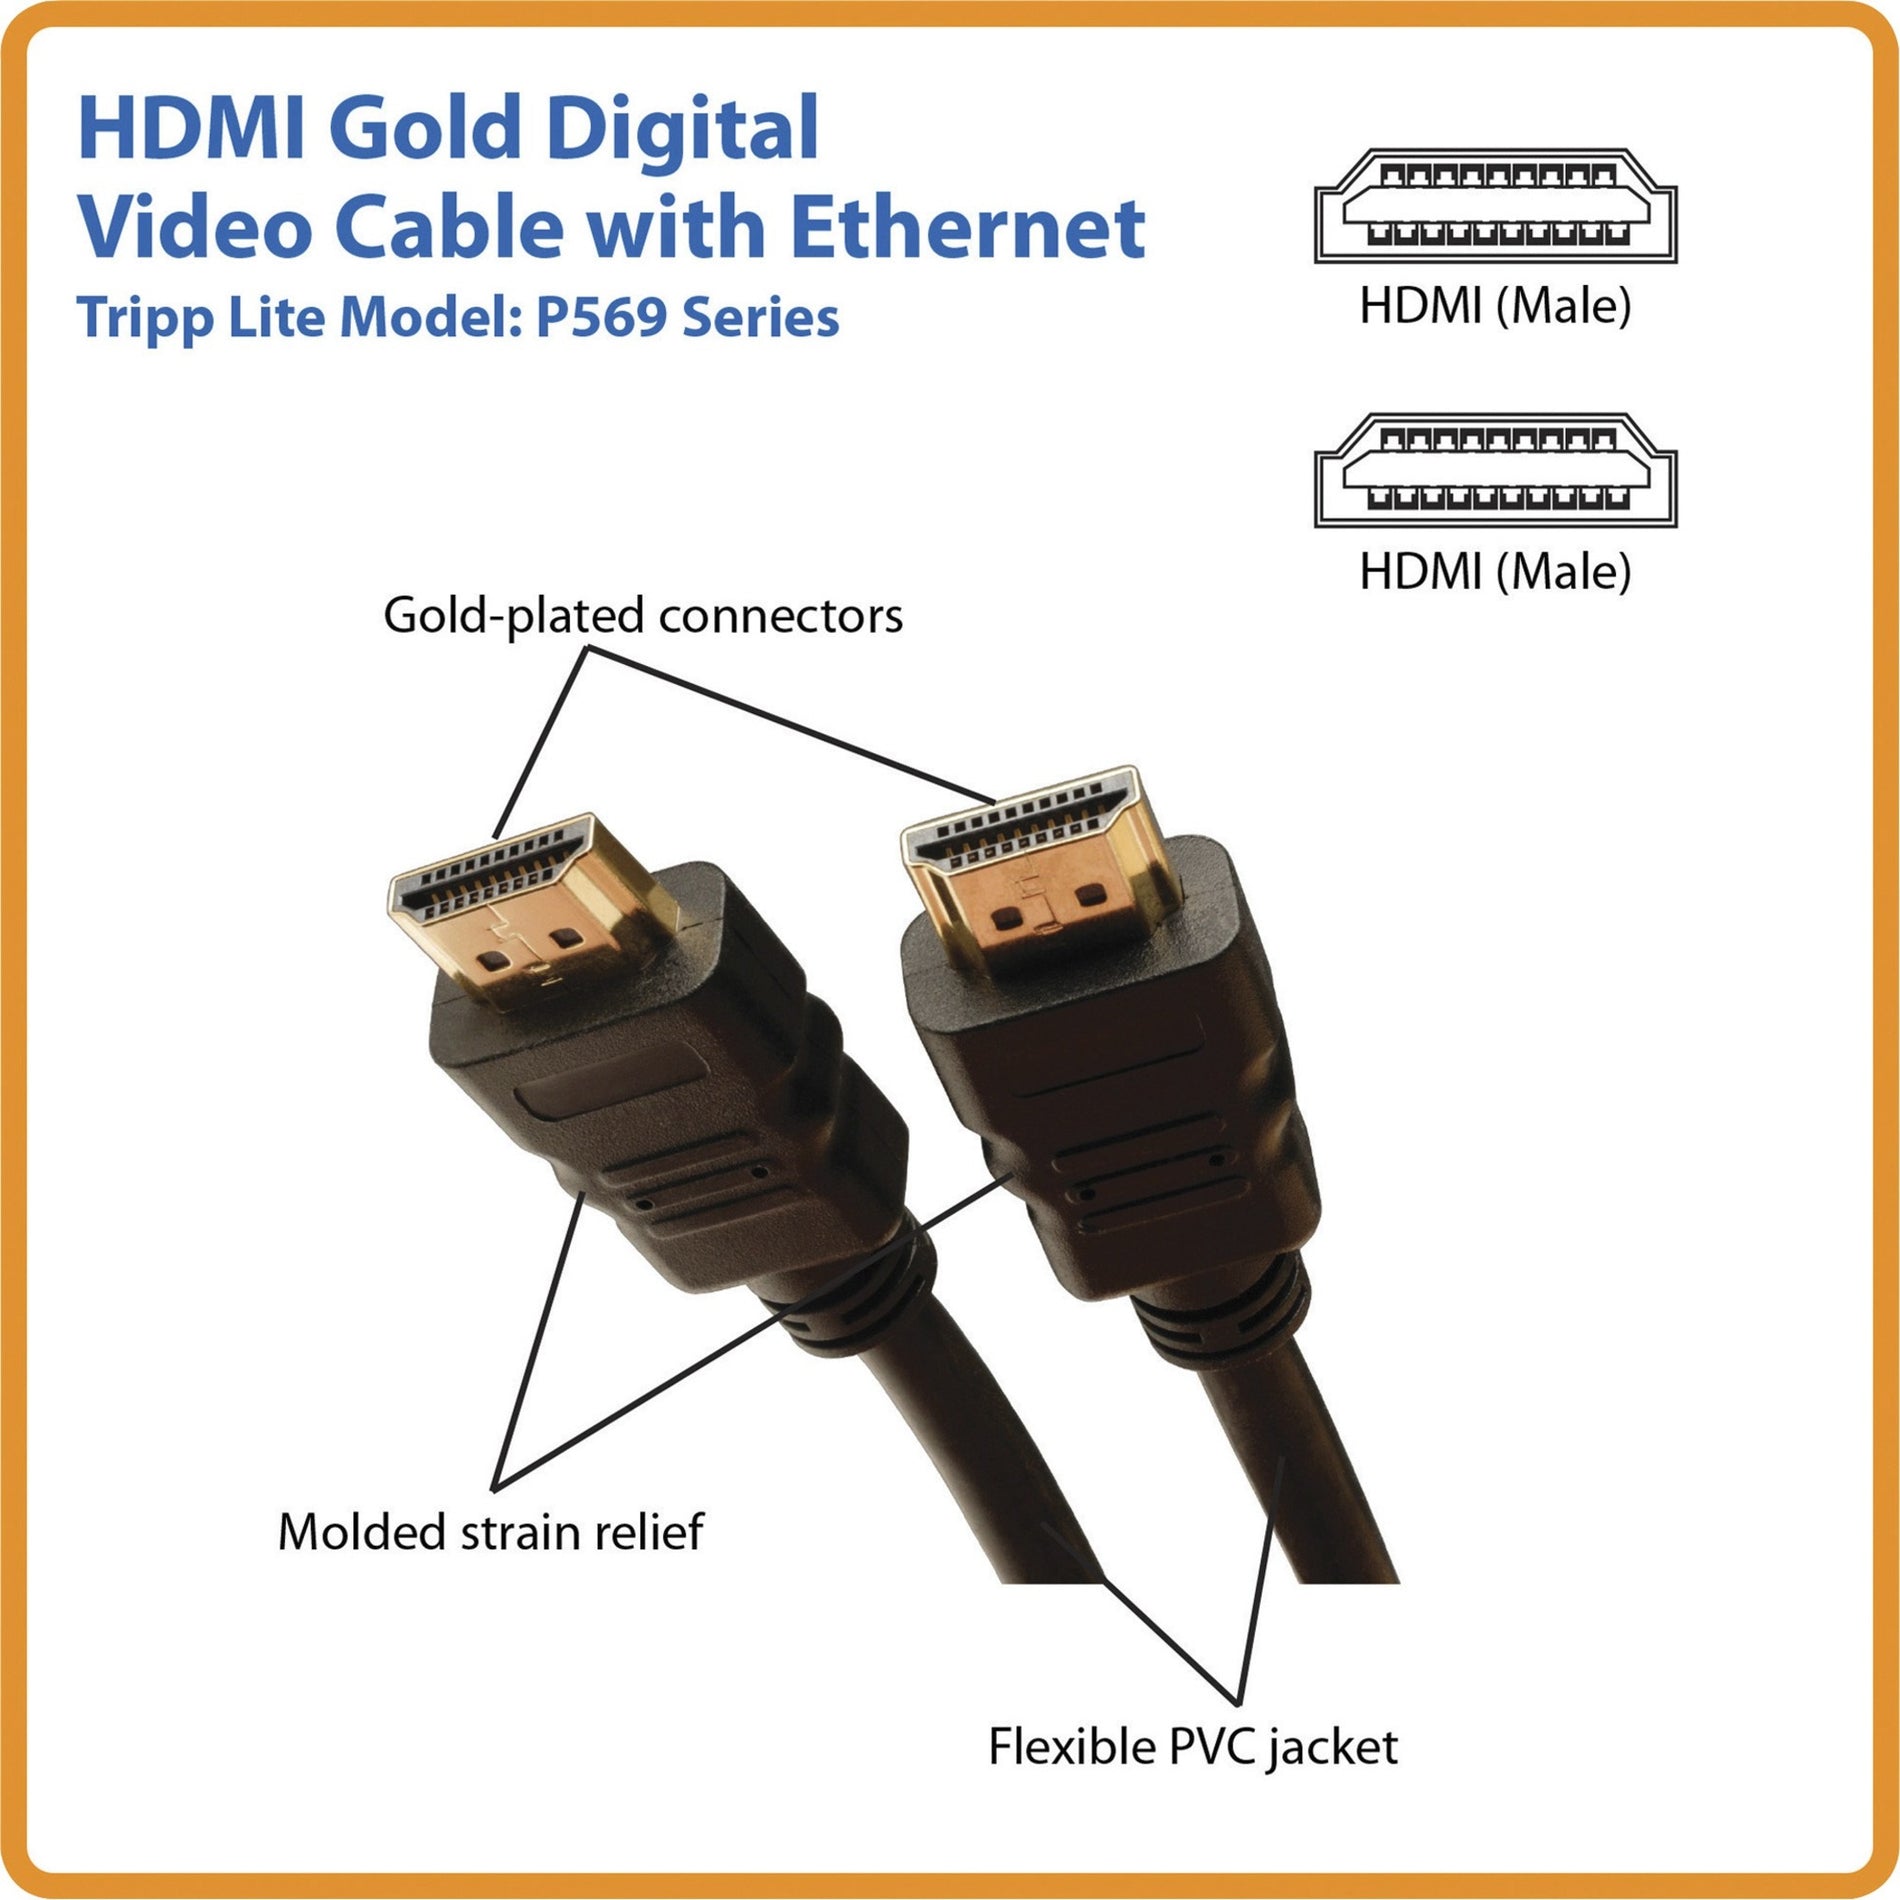 Tripp Lite P569-025 High Speed HDMI Cable with Ethernet, 25 ft, Molded, Gold Plated Connectors, 18 Gbit/s Data Transfer Rate, 3840 x 2160 Supported Resolution